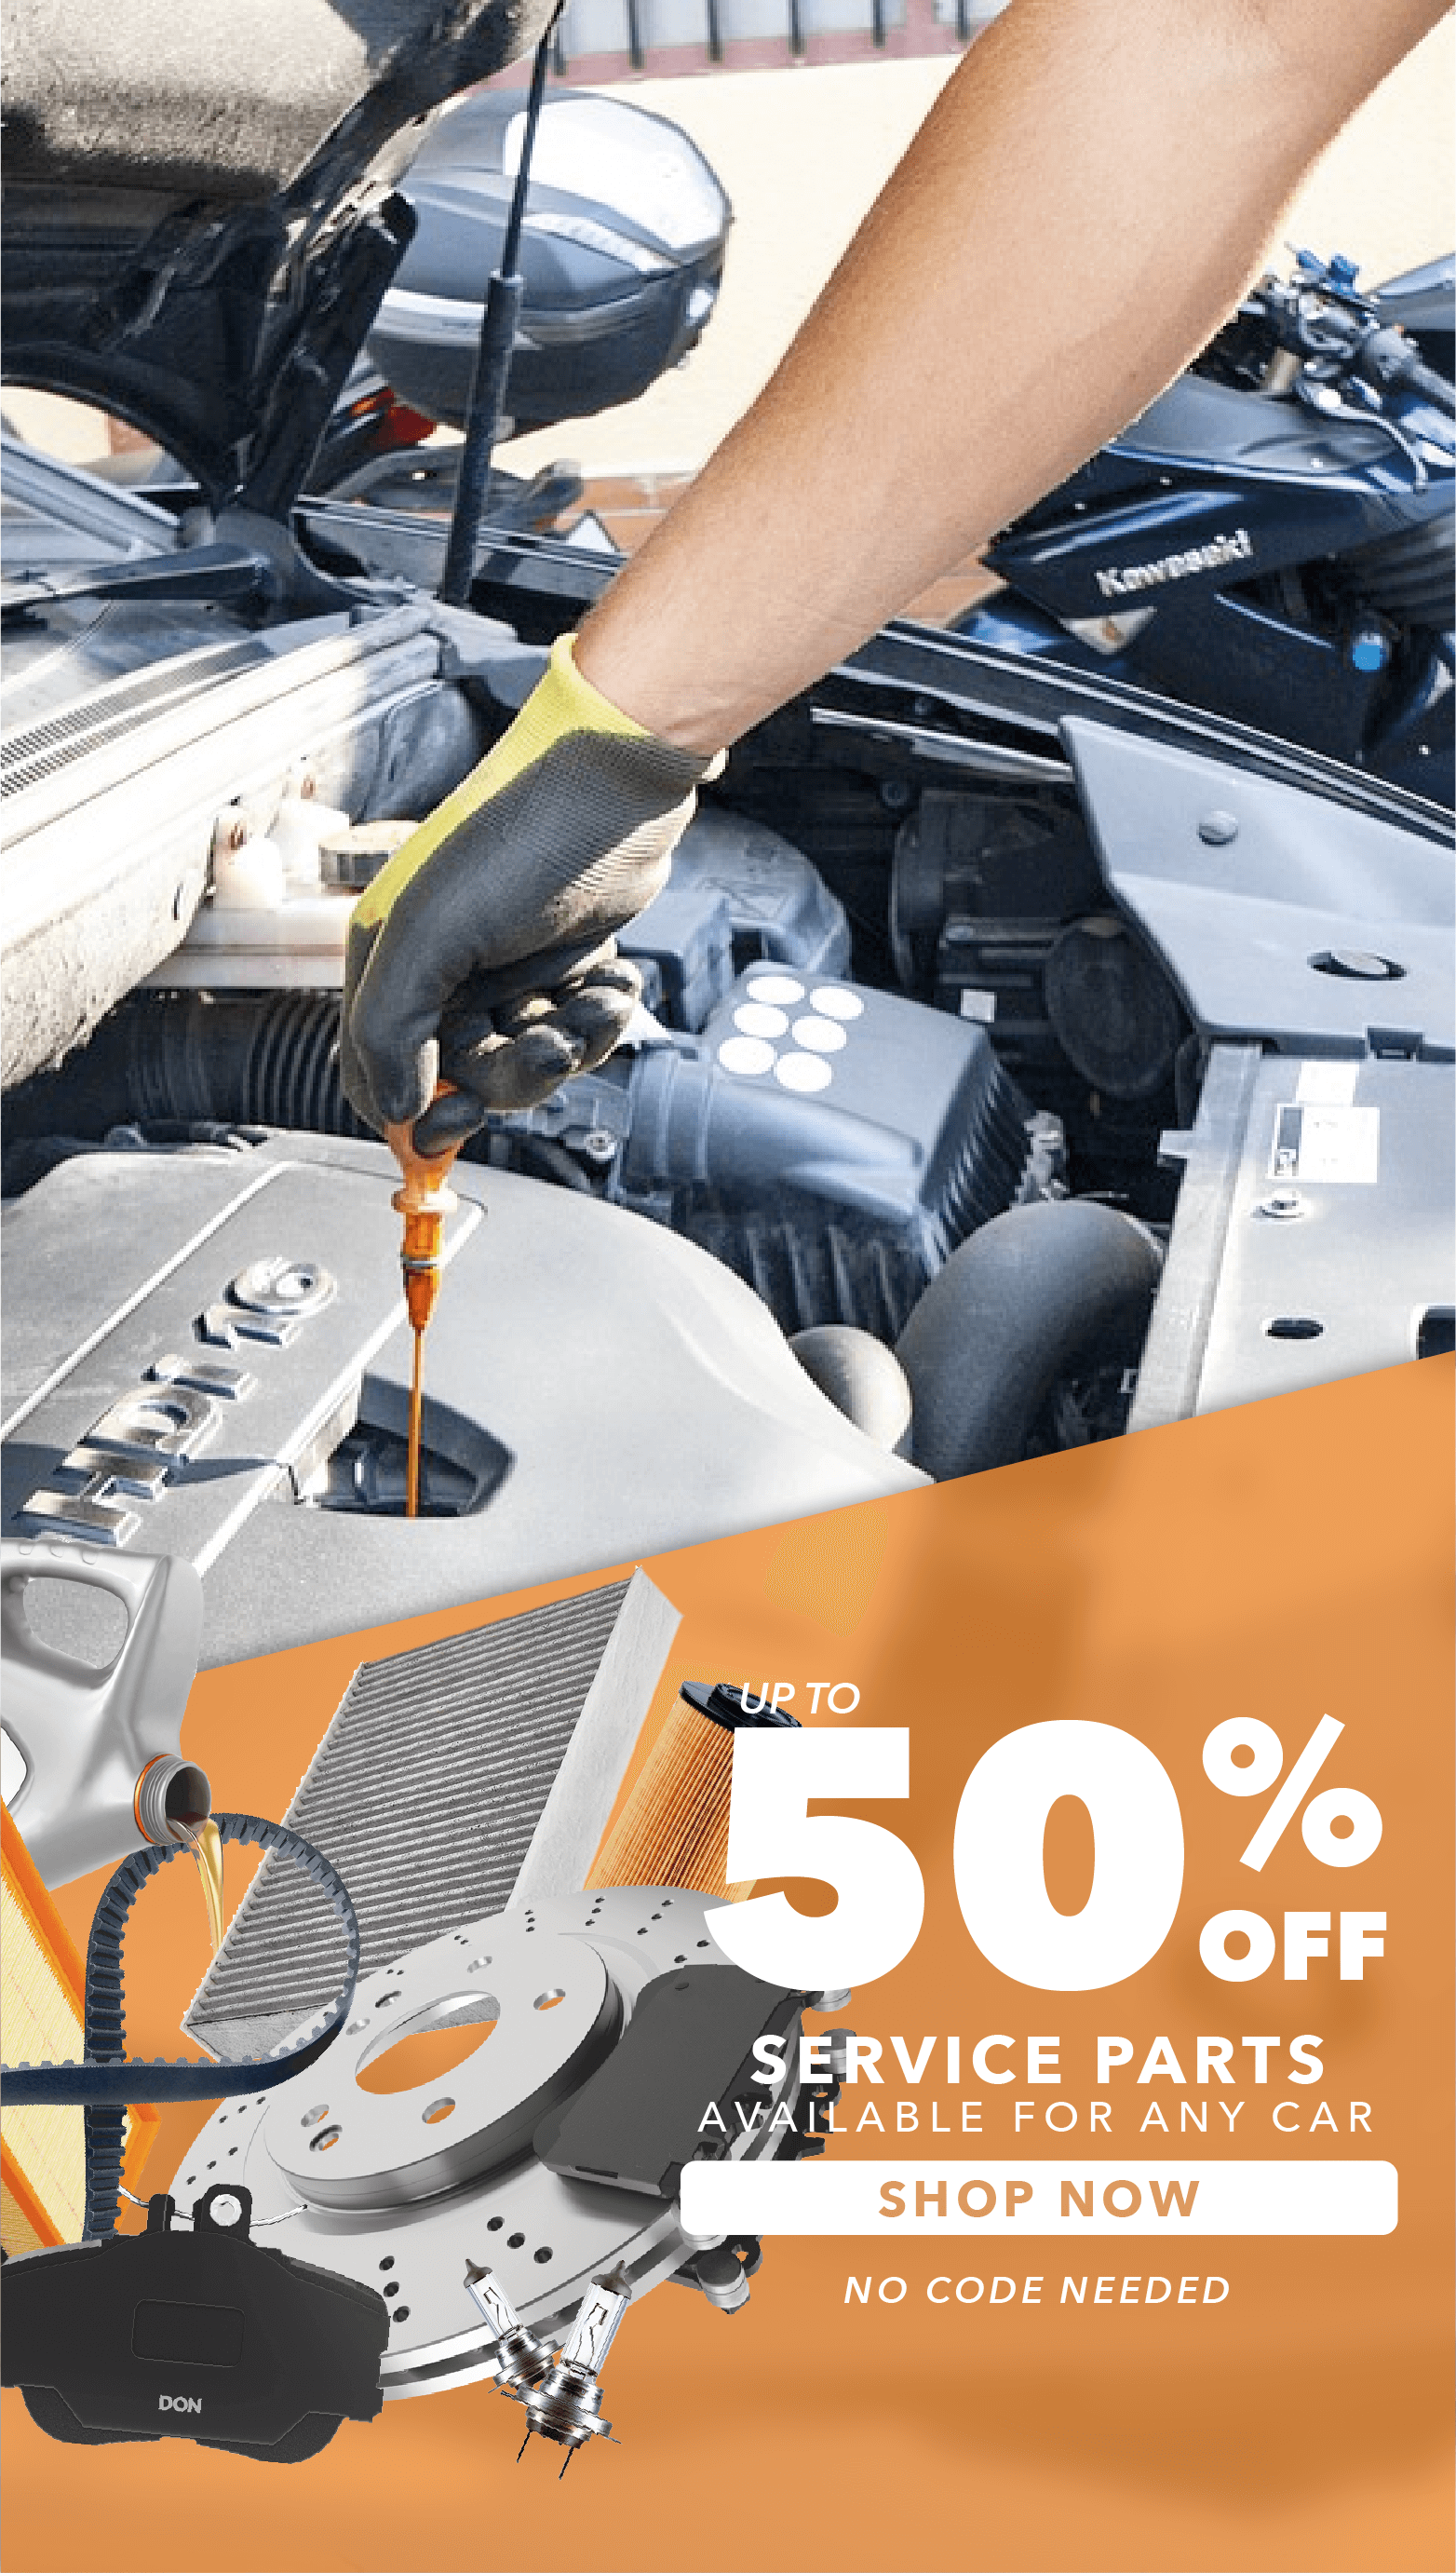 Save up to 50% on quality Service Parts with no code required